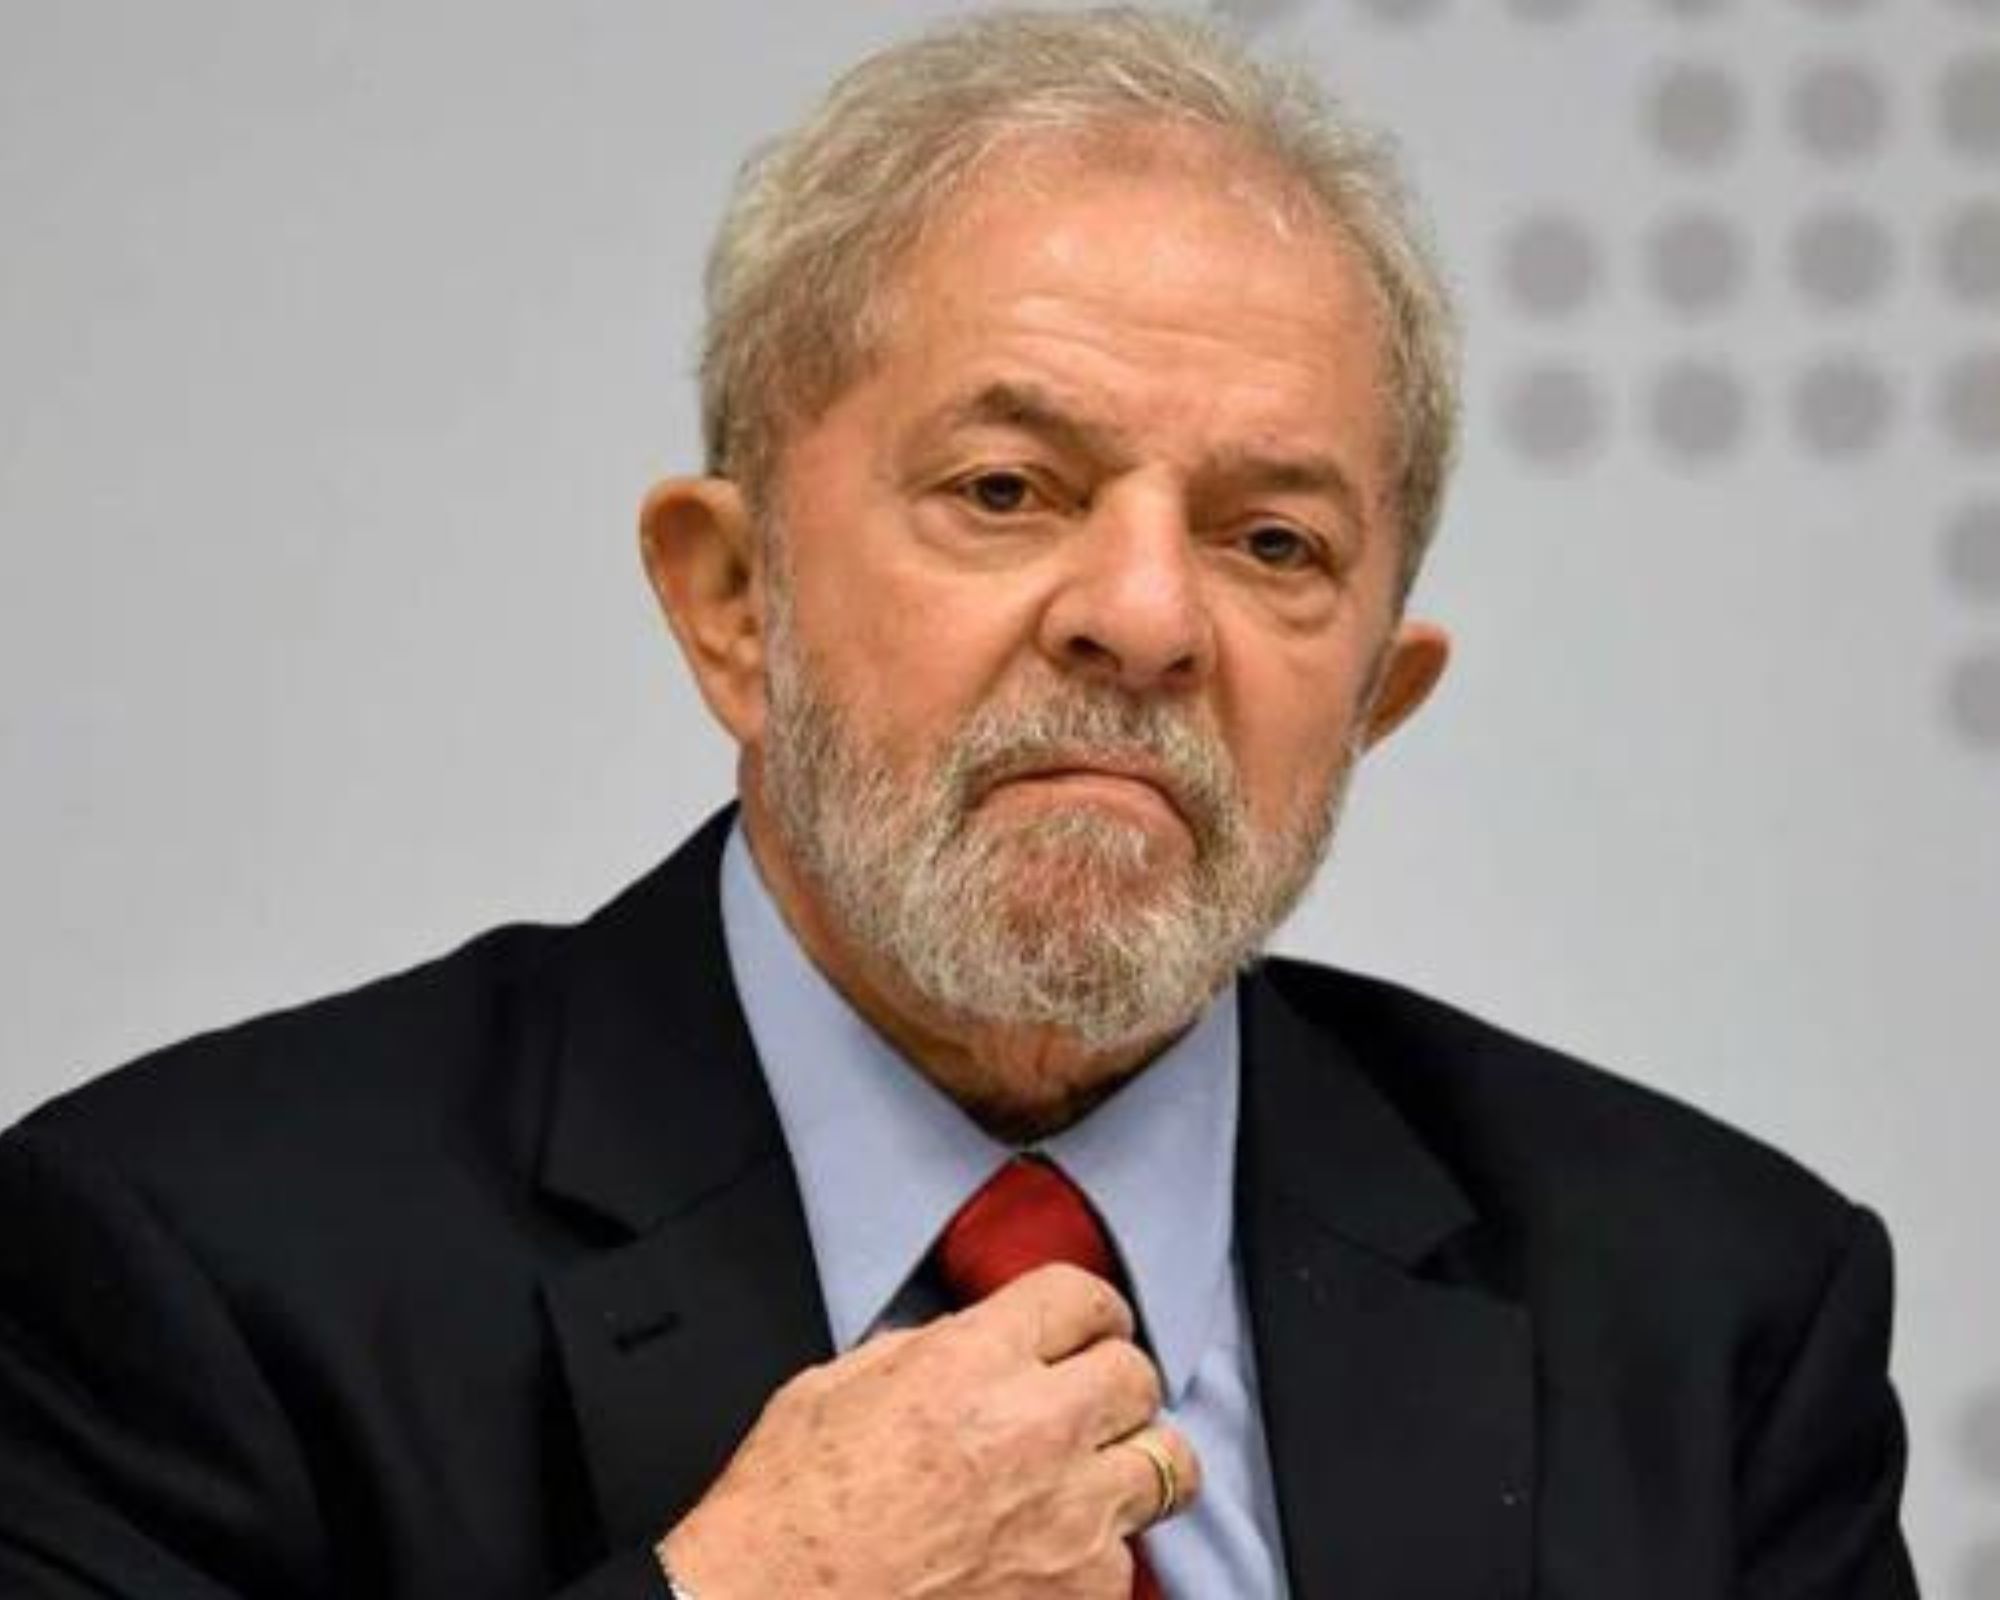 Brazil's new president Lula will take the oath of office